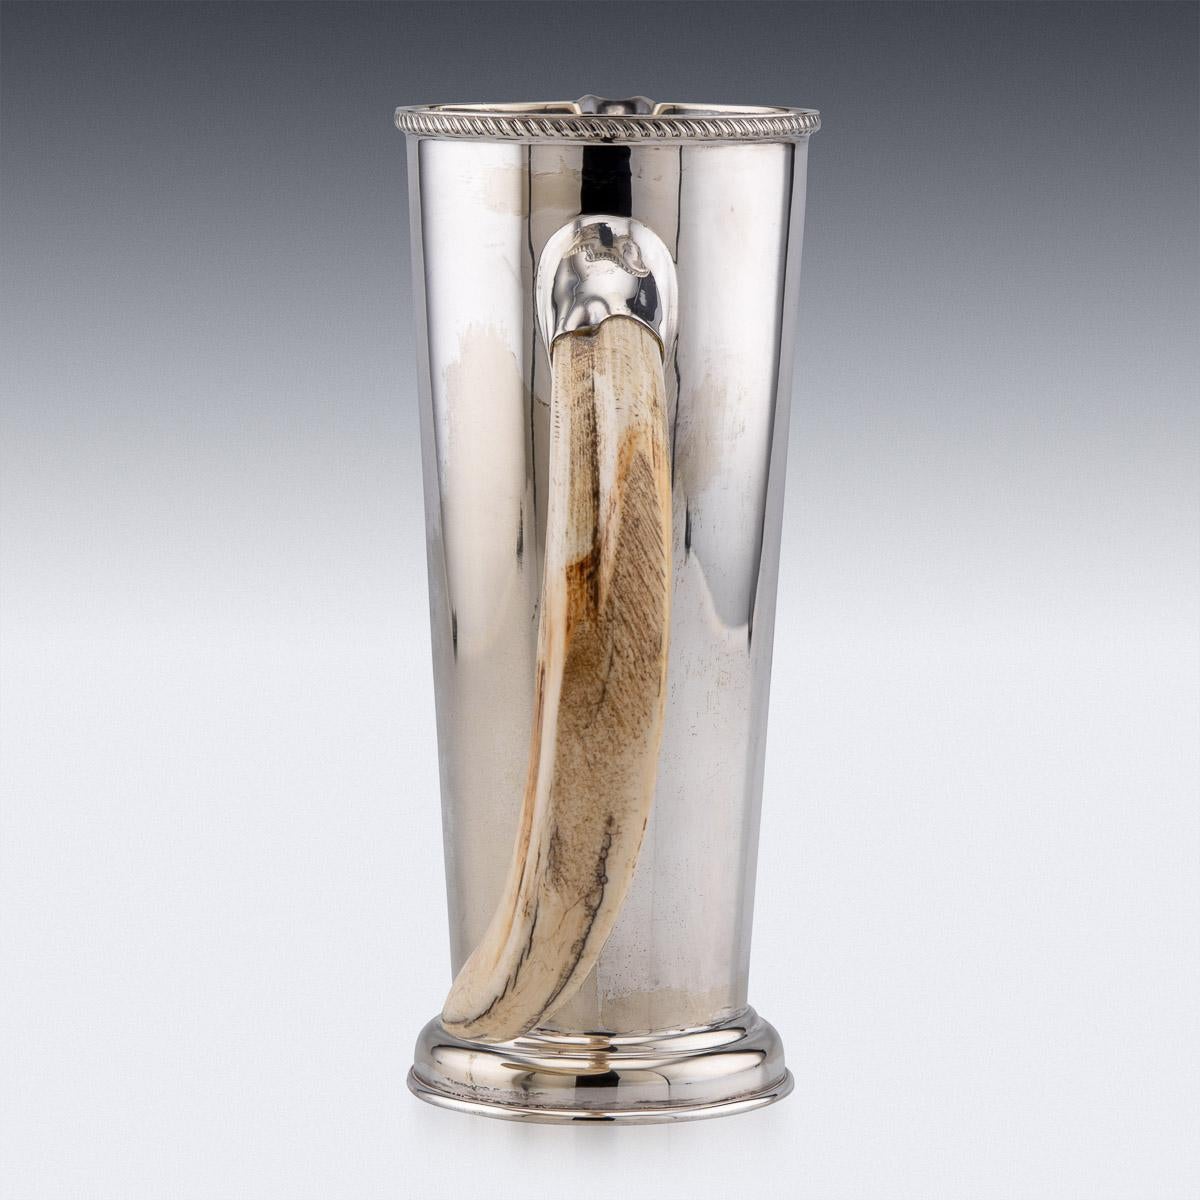 20th century British made silver plated and mounted with a boar tusk, mixing cocktail jug with a mixing spoon. The tapered body mounted with a cast gadrooned boarder and standing on a domed foot. Hallmarked RHV & CO, Made in England, circa